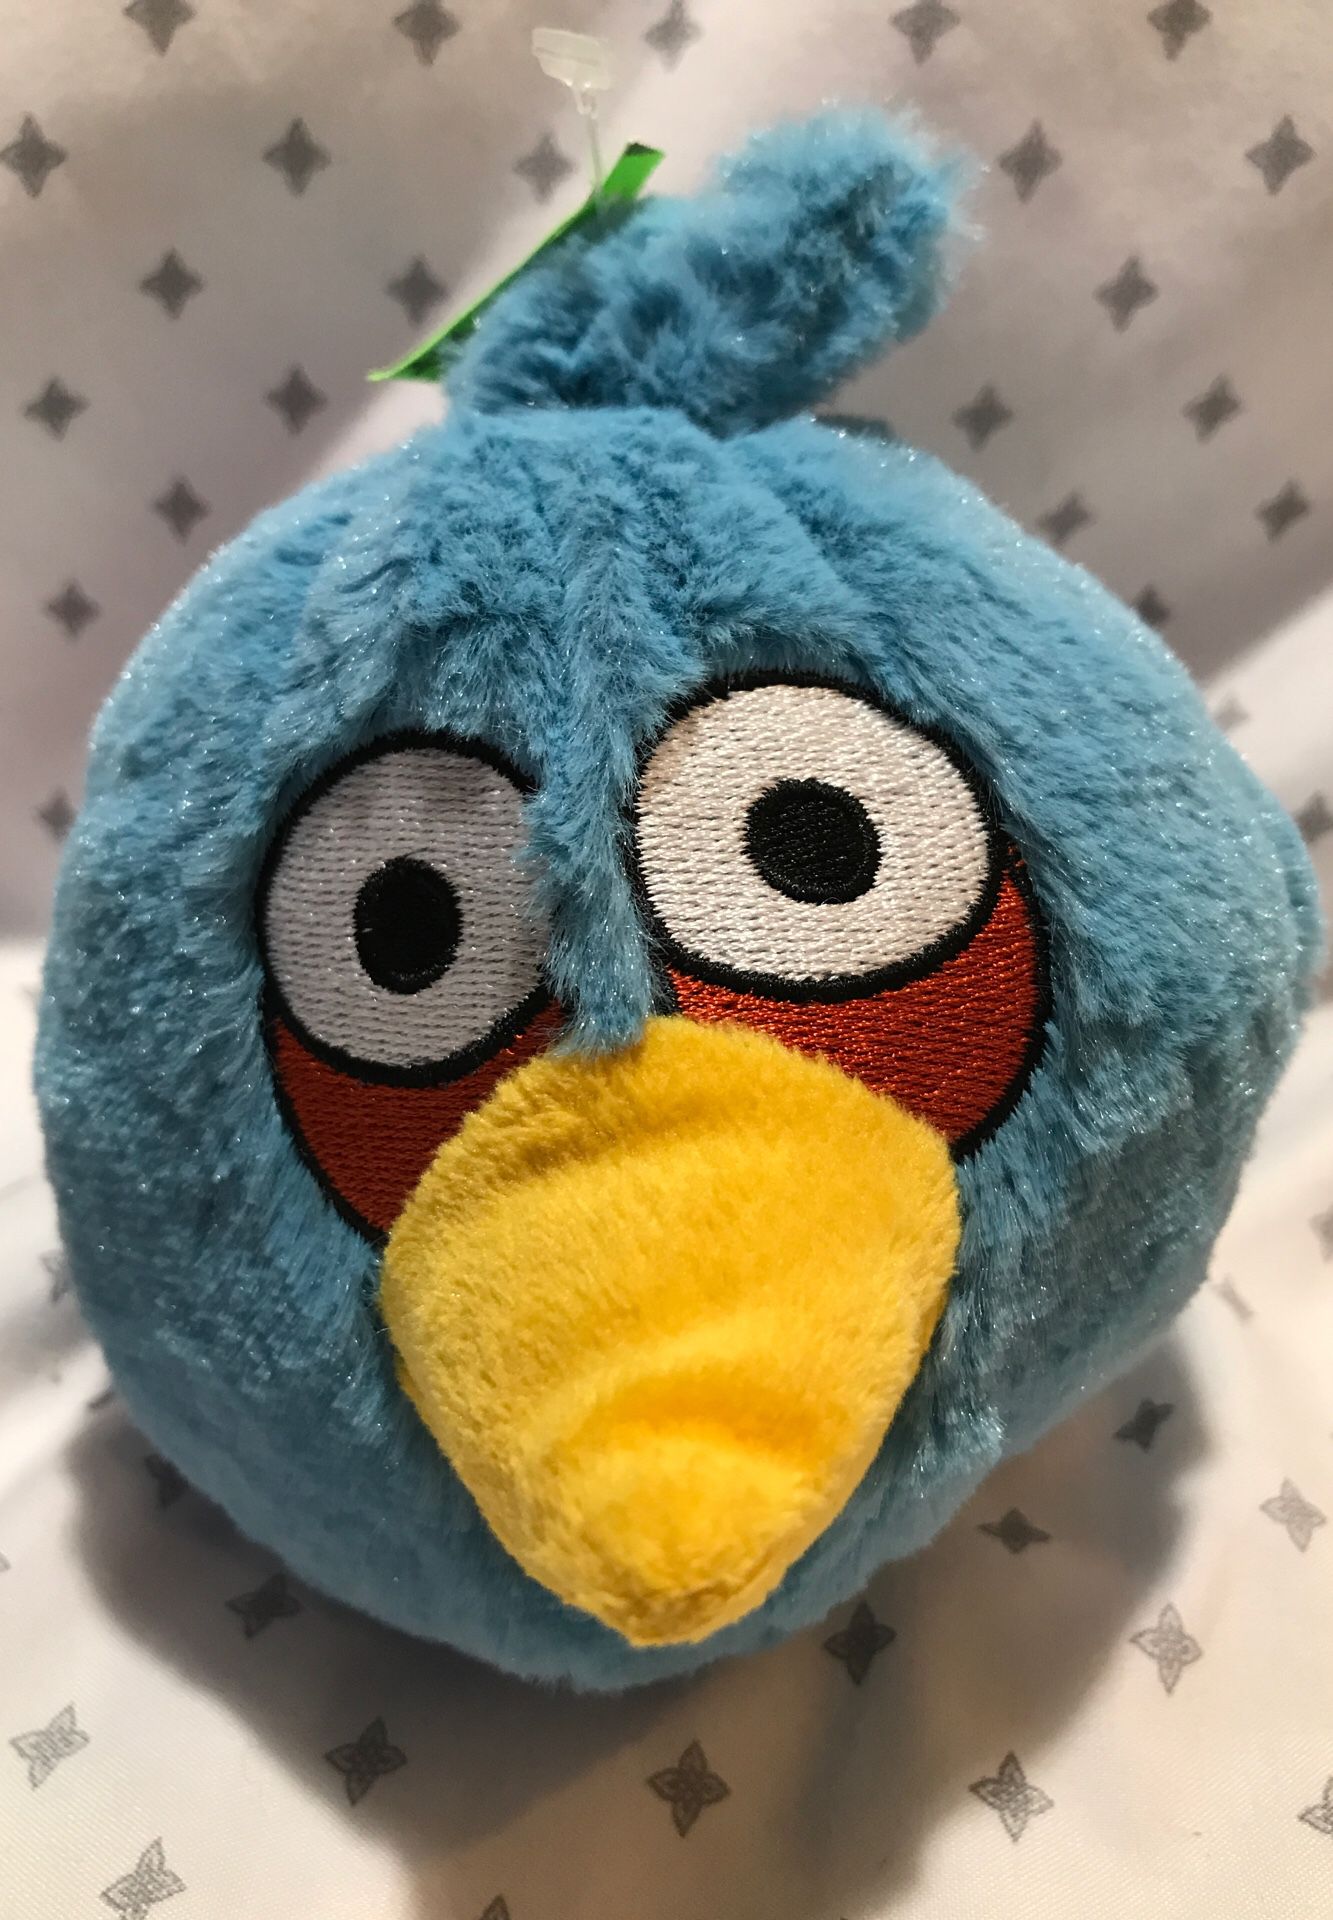 4.5” Angry Bird stuffed animal Open page to see the rest